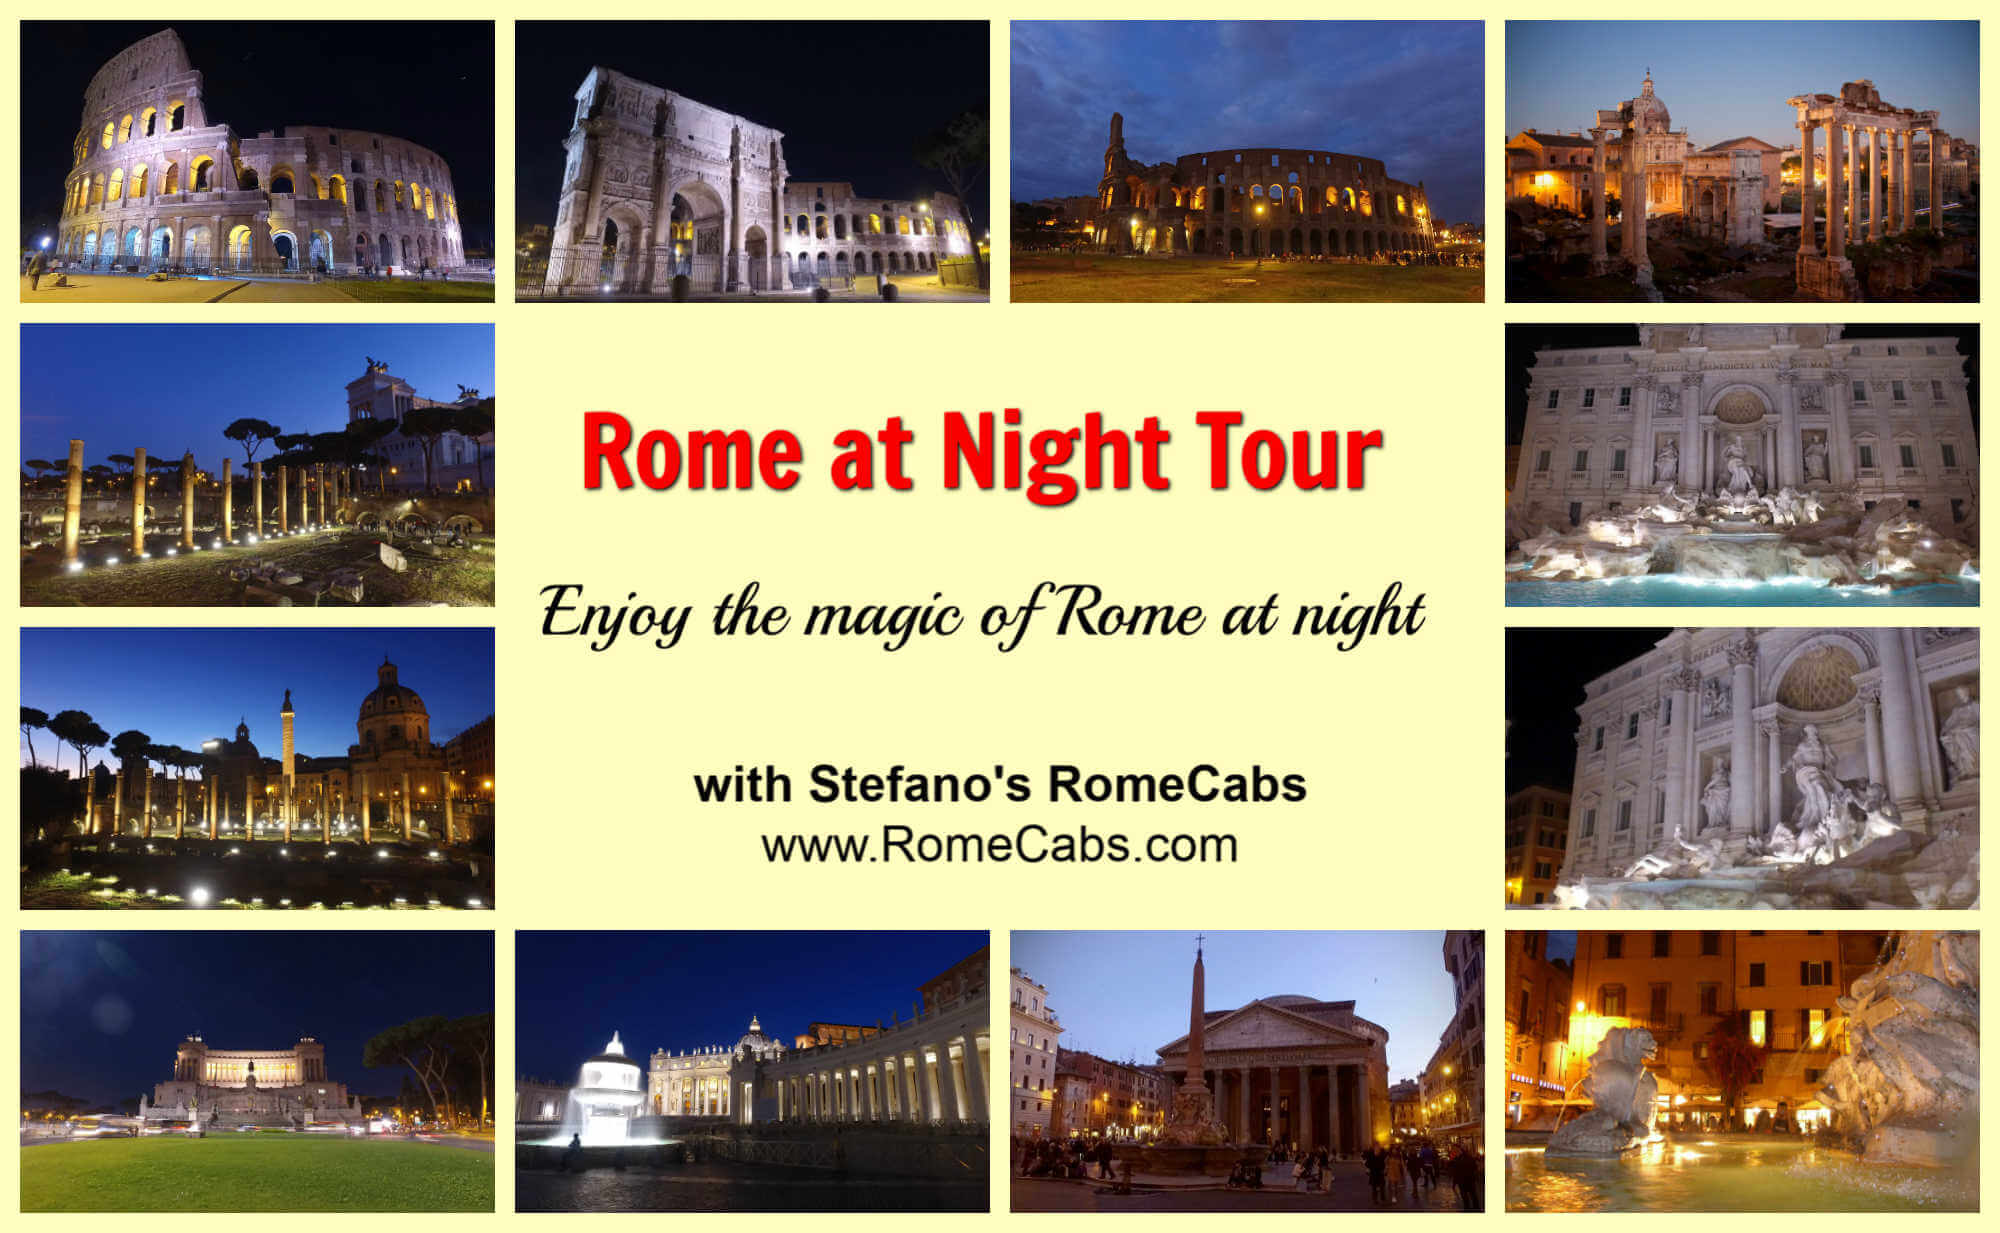 Rome at night tour with RomeCabs